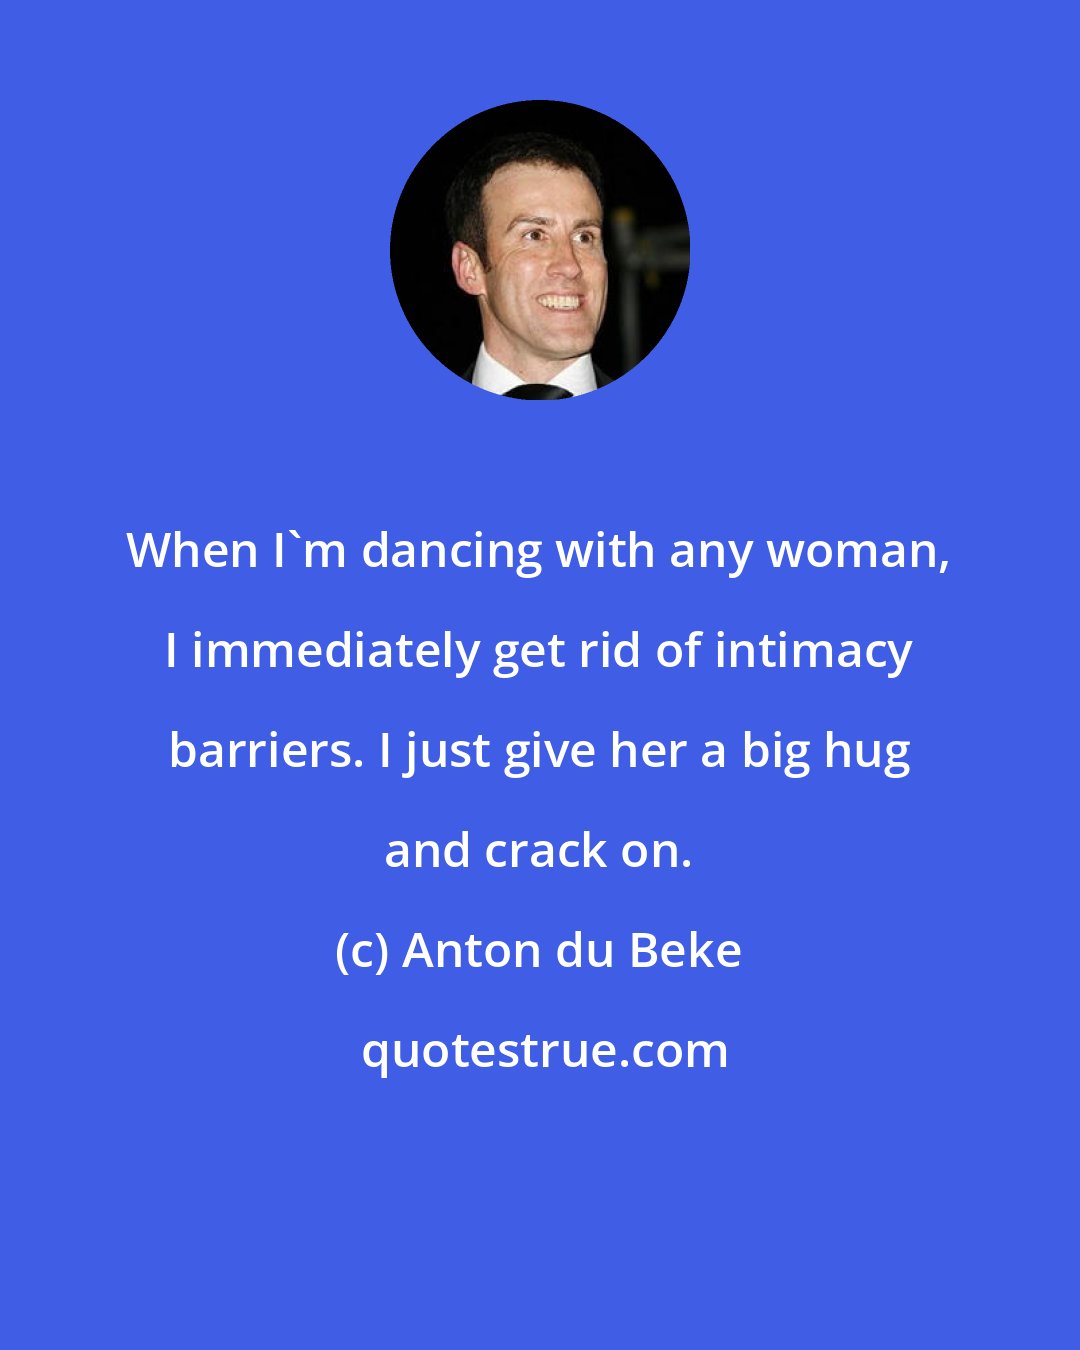 Anton du Beke: When I'm dancing with any woman, I immediately get rid of intimacy barriers. I just give her a big hug and crack on.